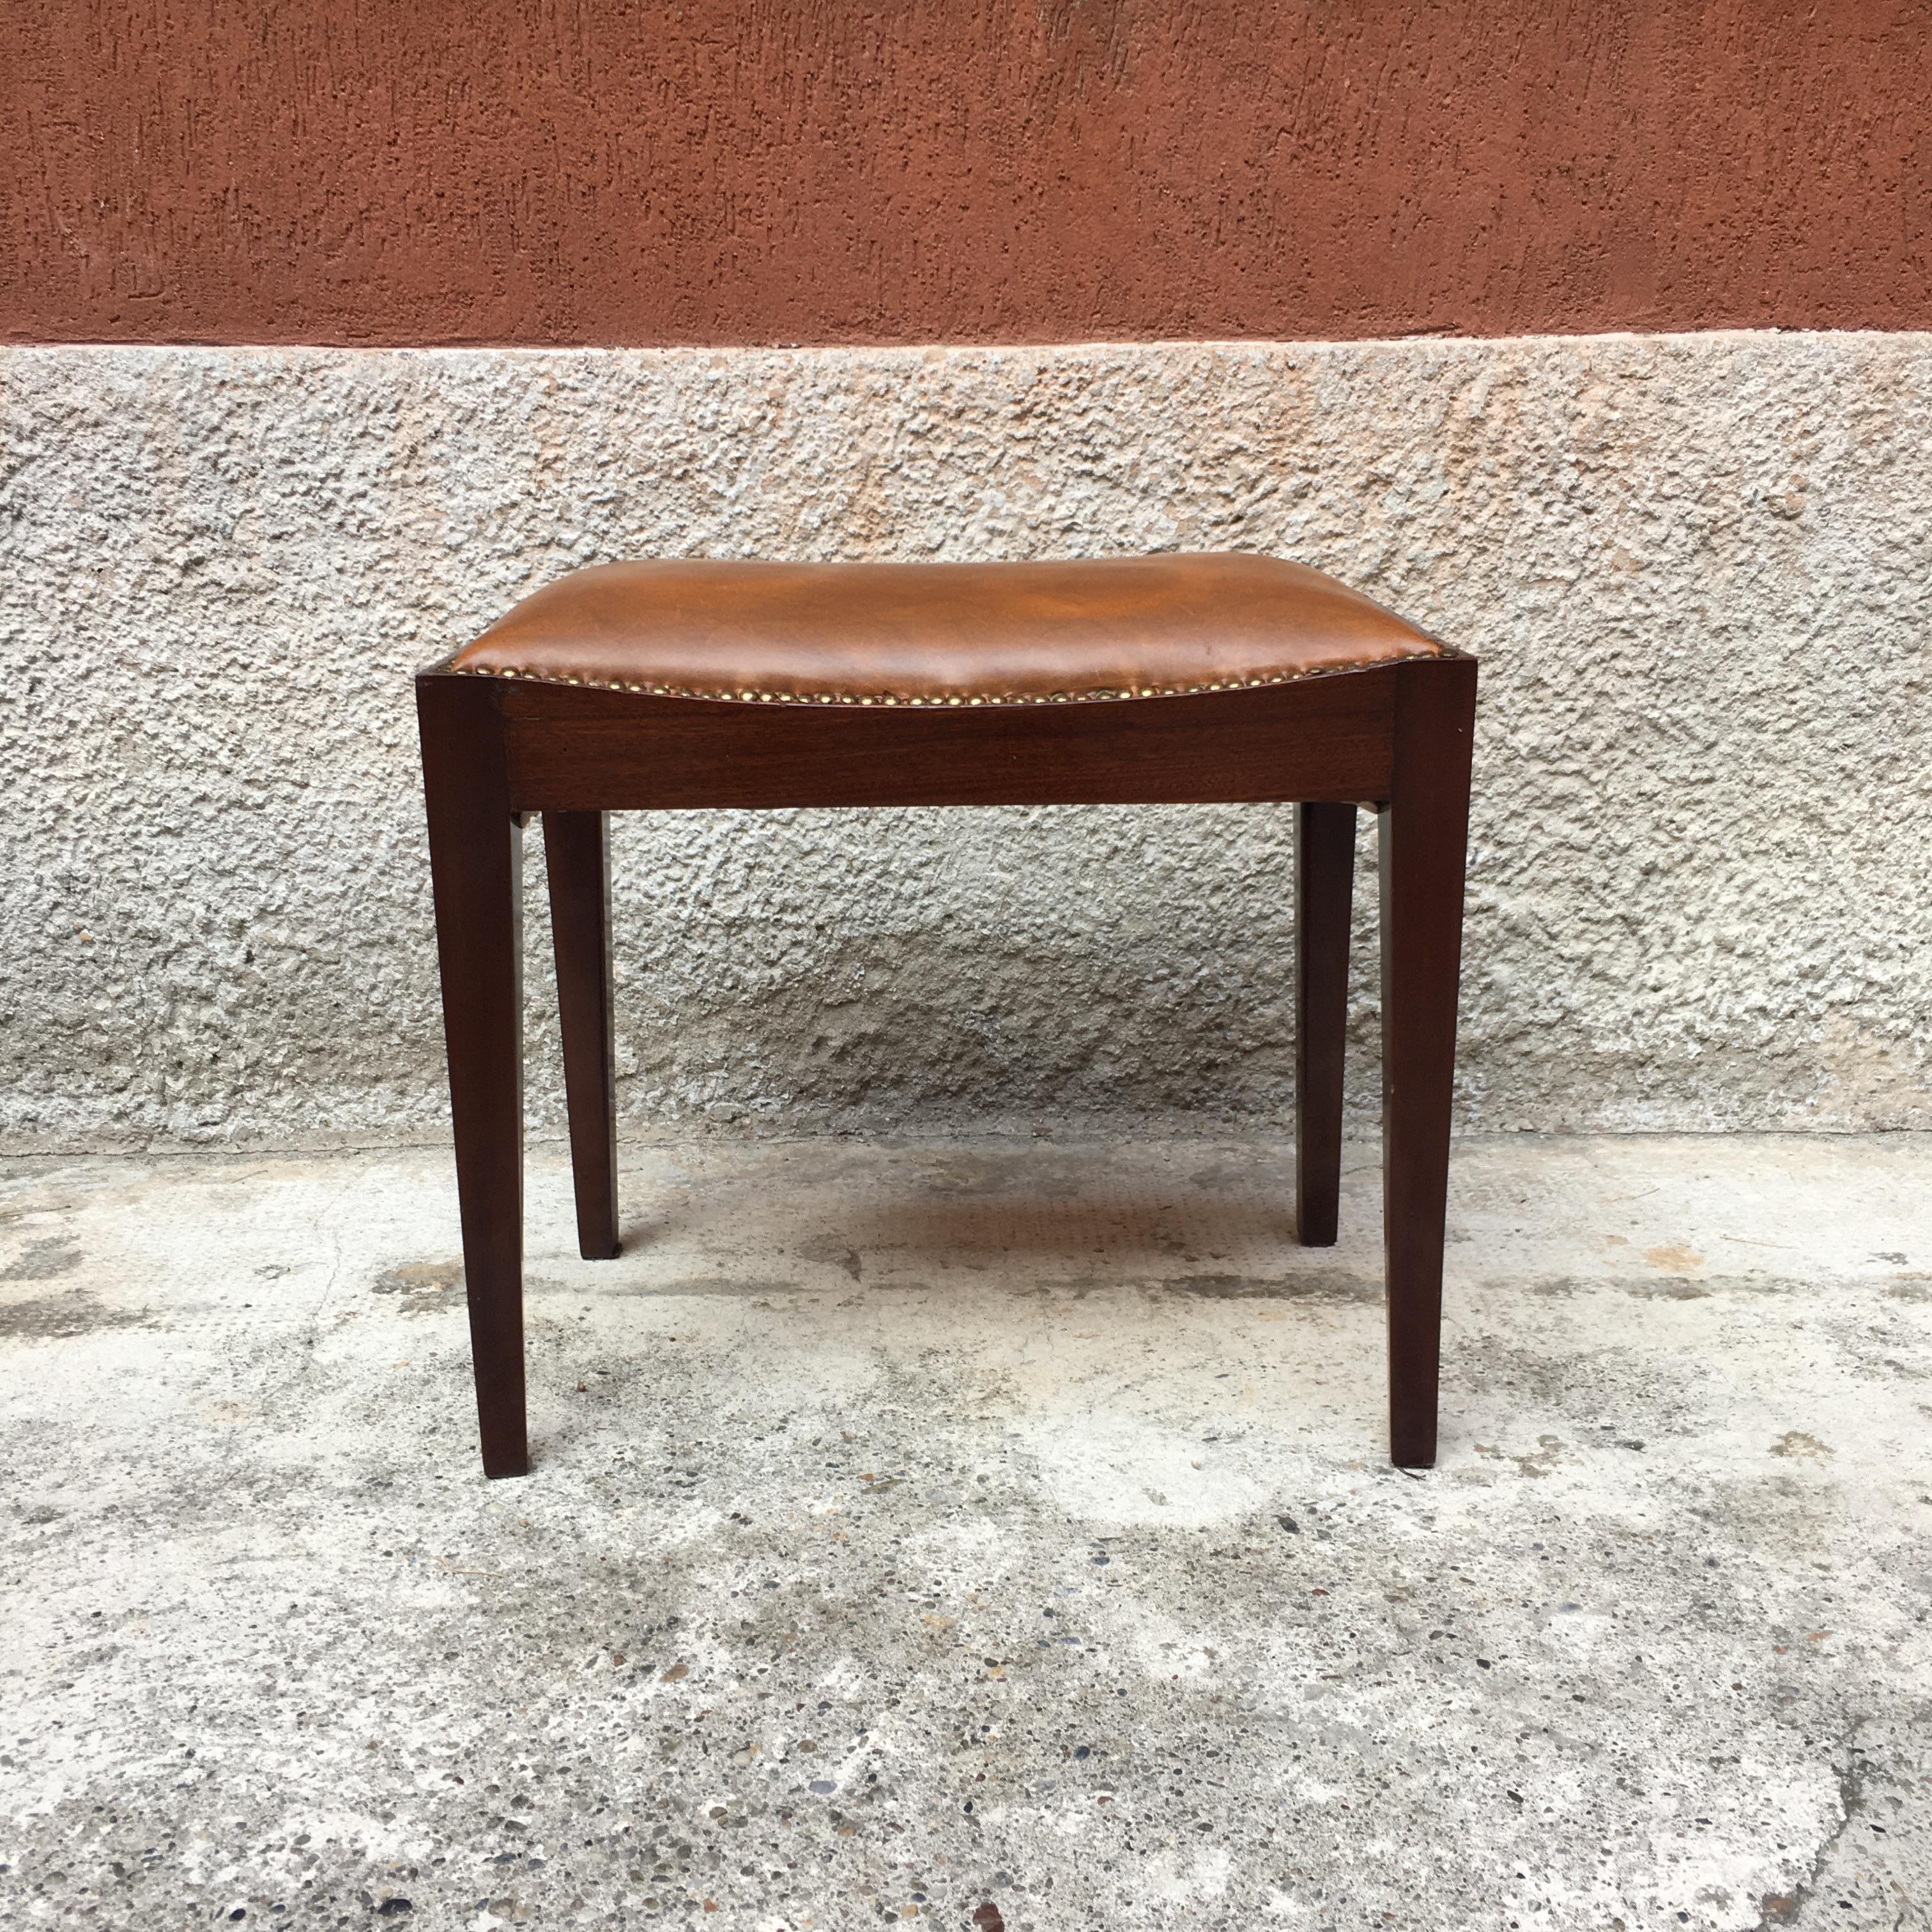 Italian brown leather and dark solid wood pouf, 1960s
Pouf with brown leather seat and dark solid wood frame, with brass studs on the perimeter of the seat
Very good condition.